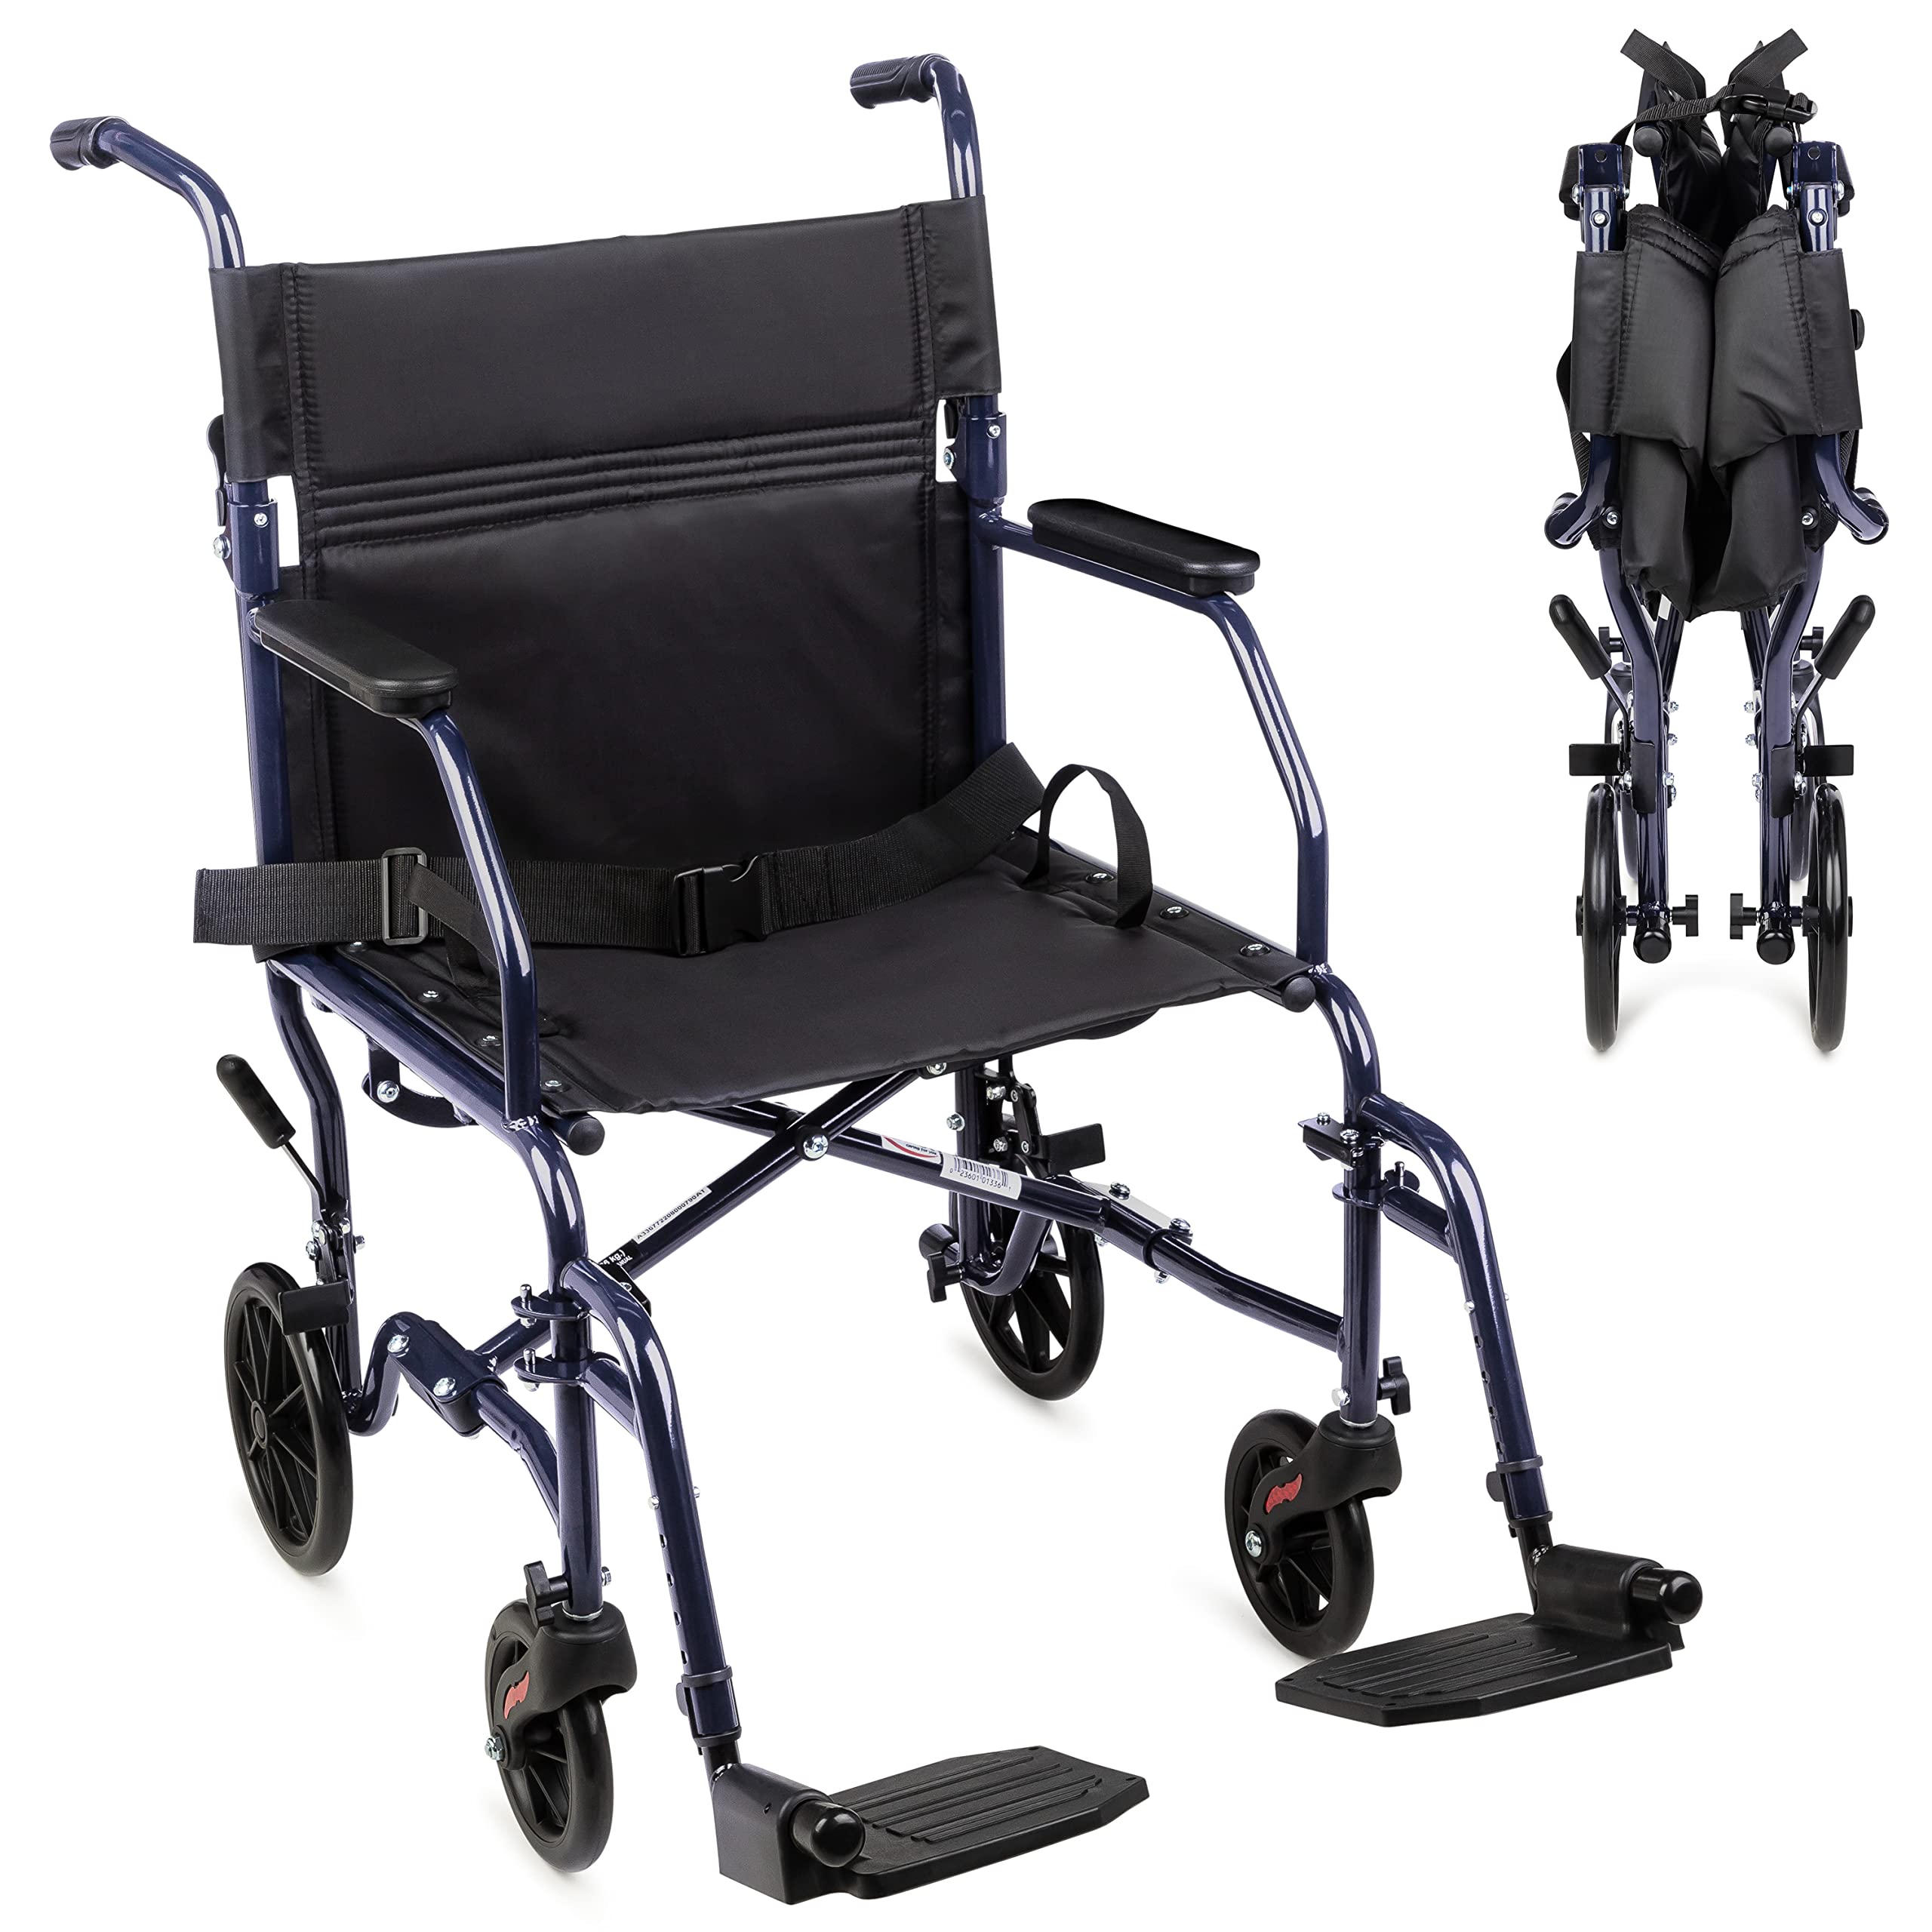 Carex Transport Wheelchair With 19 inch Seat - Folding Transport Chair with Foot Rests - Foldable Wheel Chair and Lightweight Folding Wheelchair for Storage and Travel